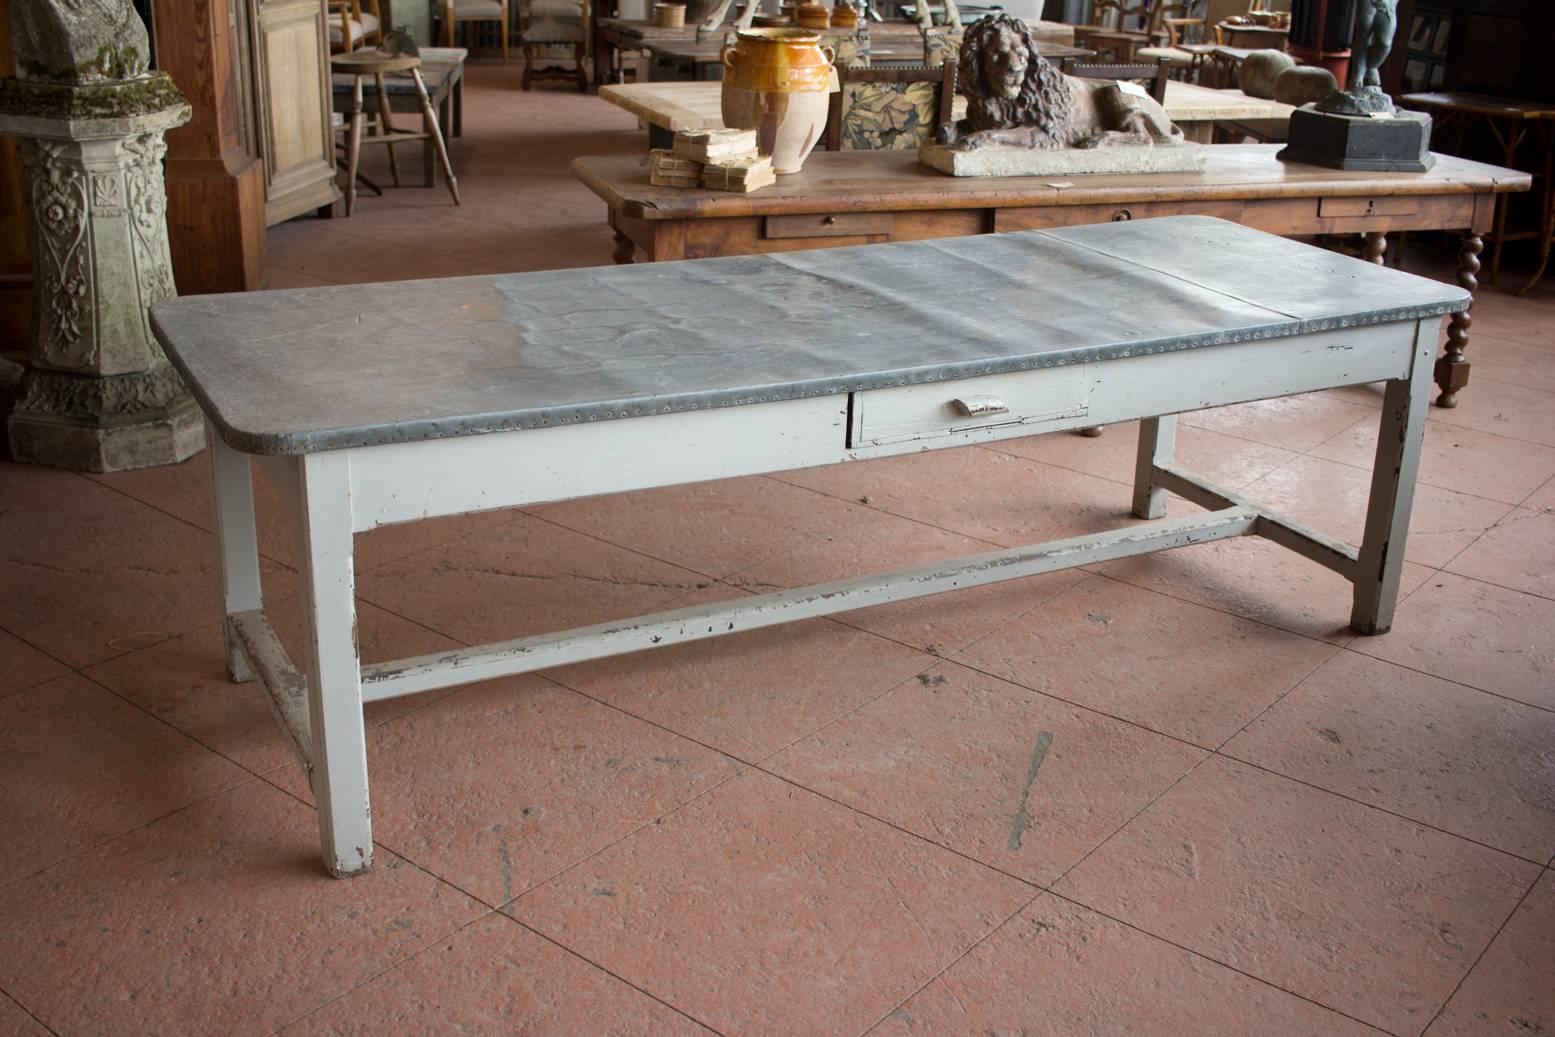 Substantial antique English painted pine zinc top preparation table with three drawers on an H stretcher base.